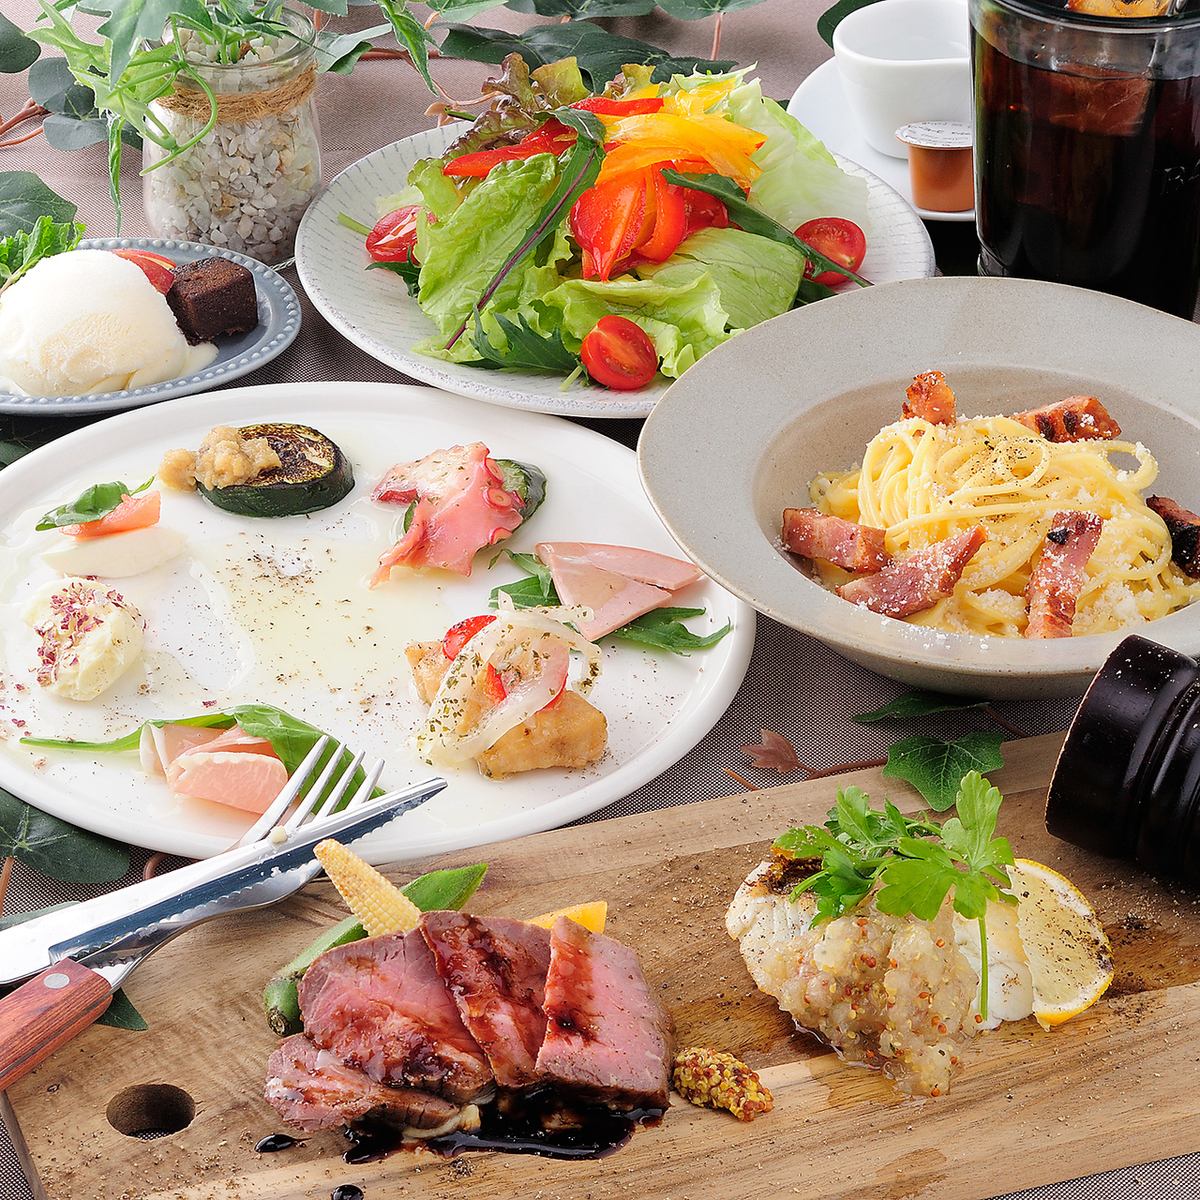 The restaurant has a casual atmosphere★Perfect for girls' gatherings, dates, banquets, etc.◎